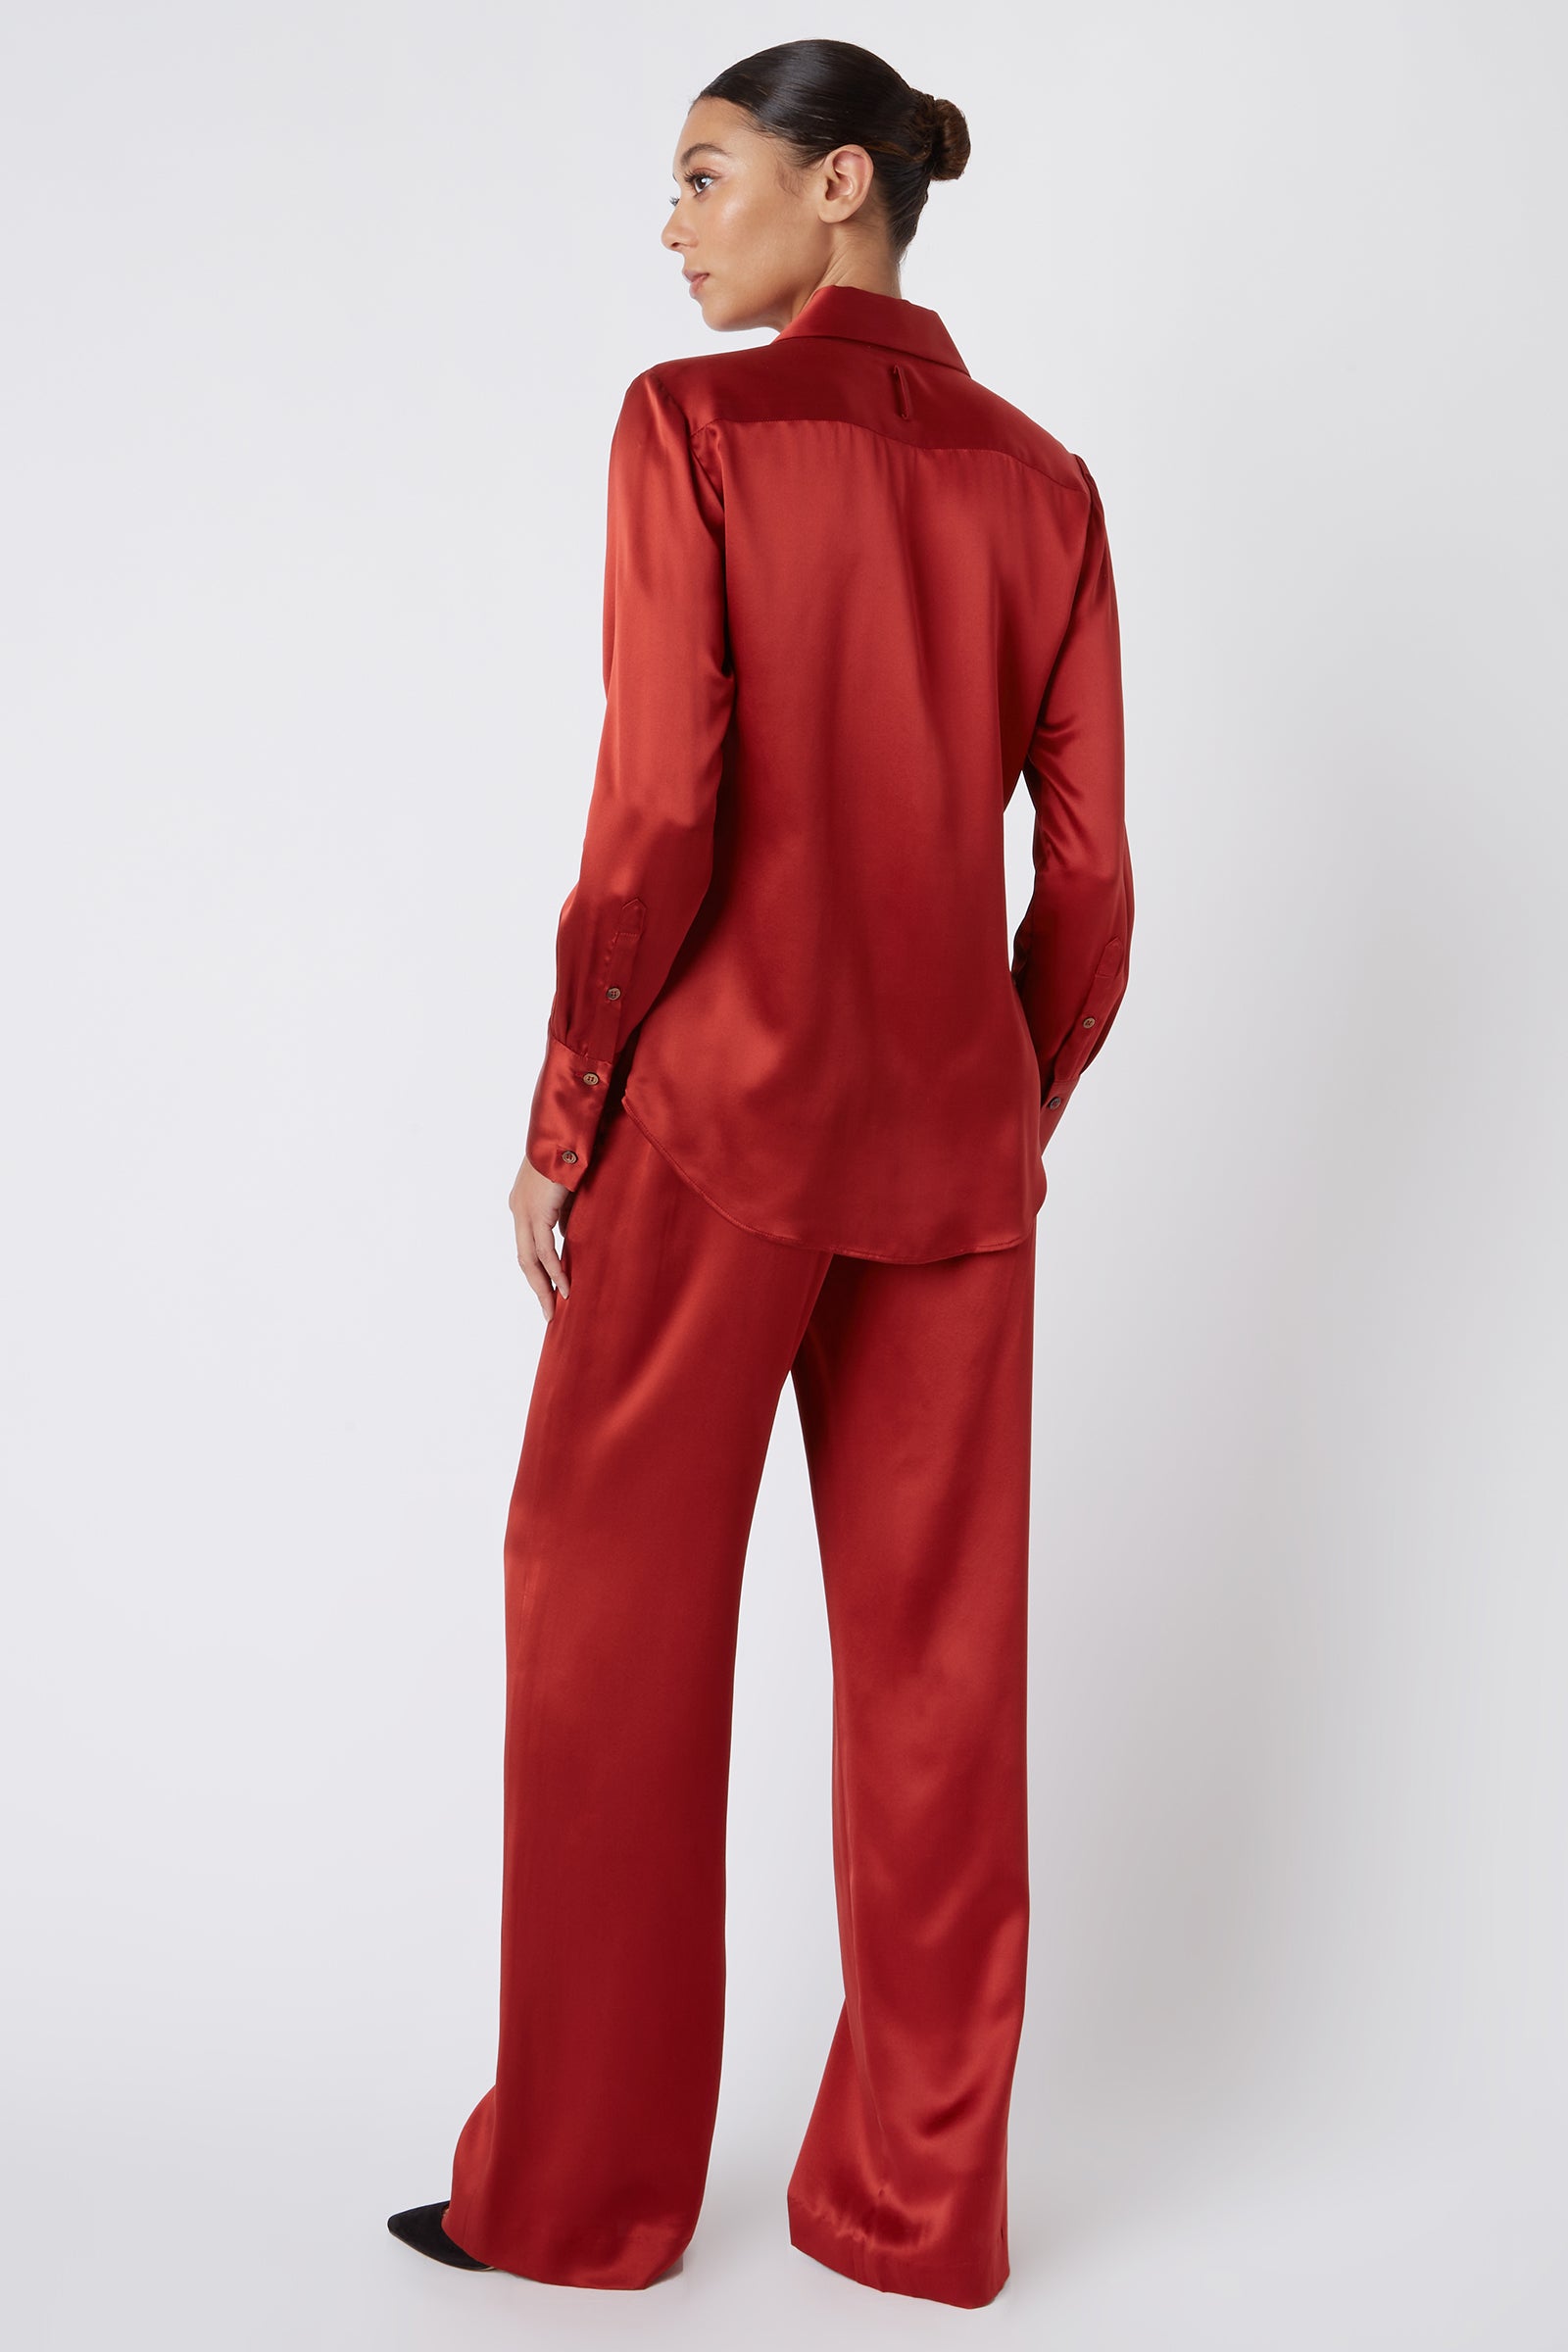 Kal Rieman Classic Tailored Blouse in Rust Silk on Model Cropped Side View